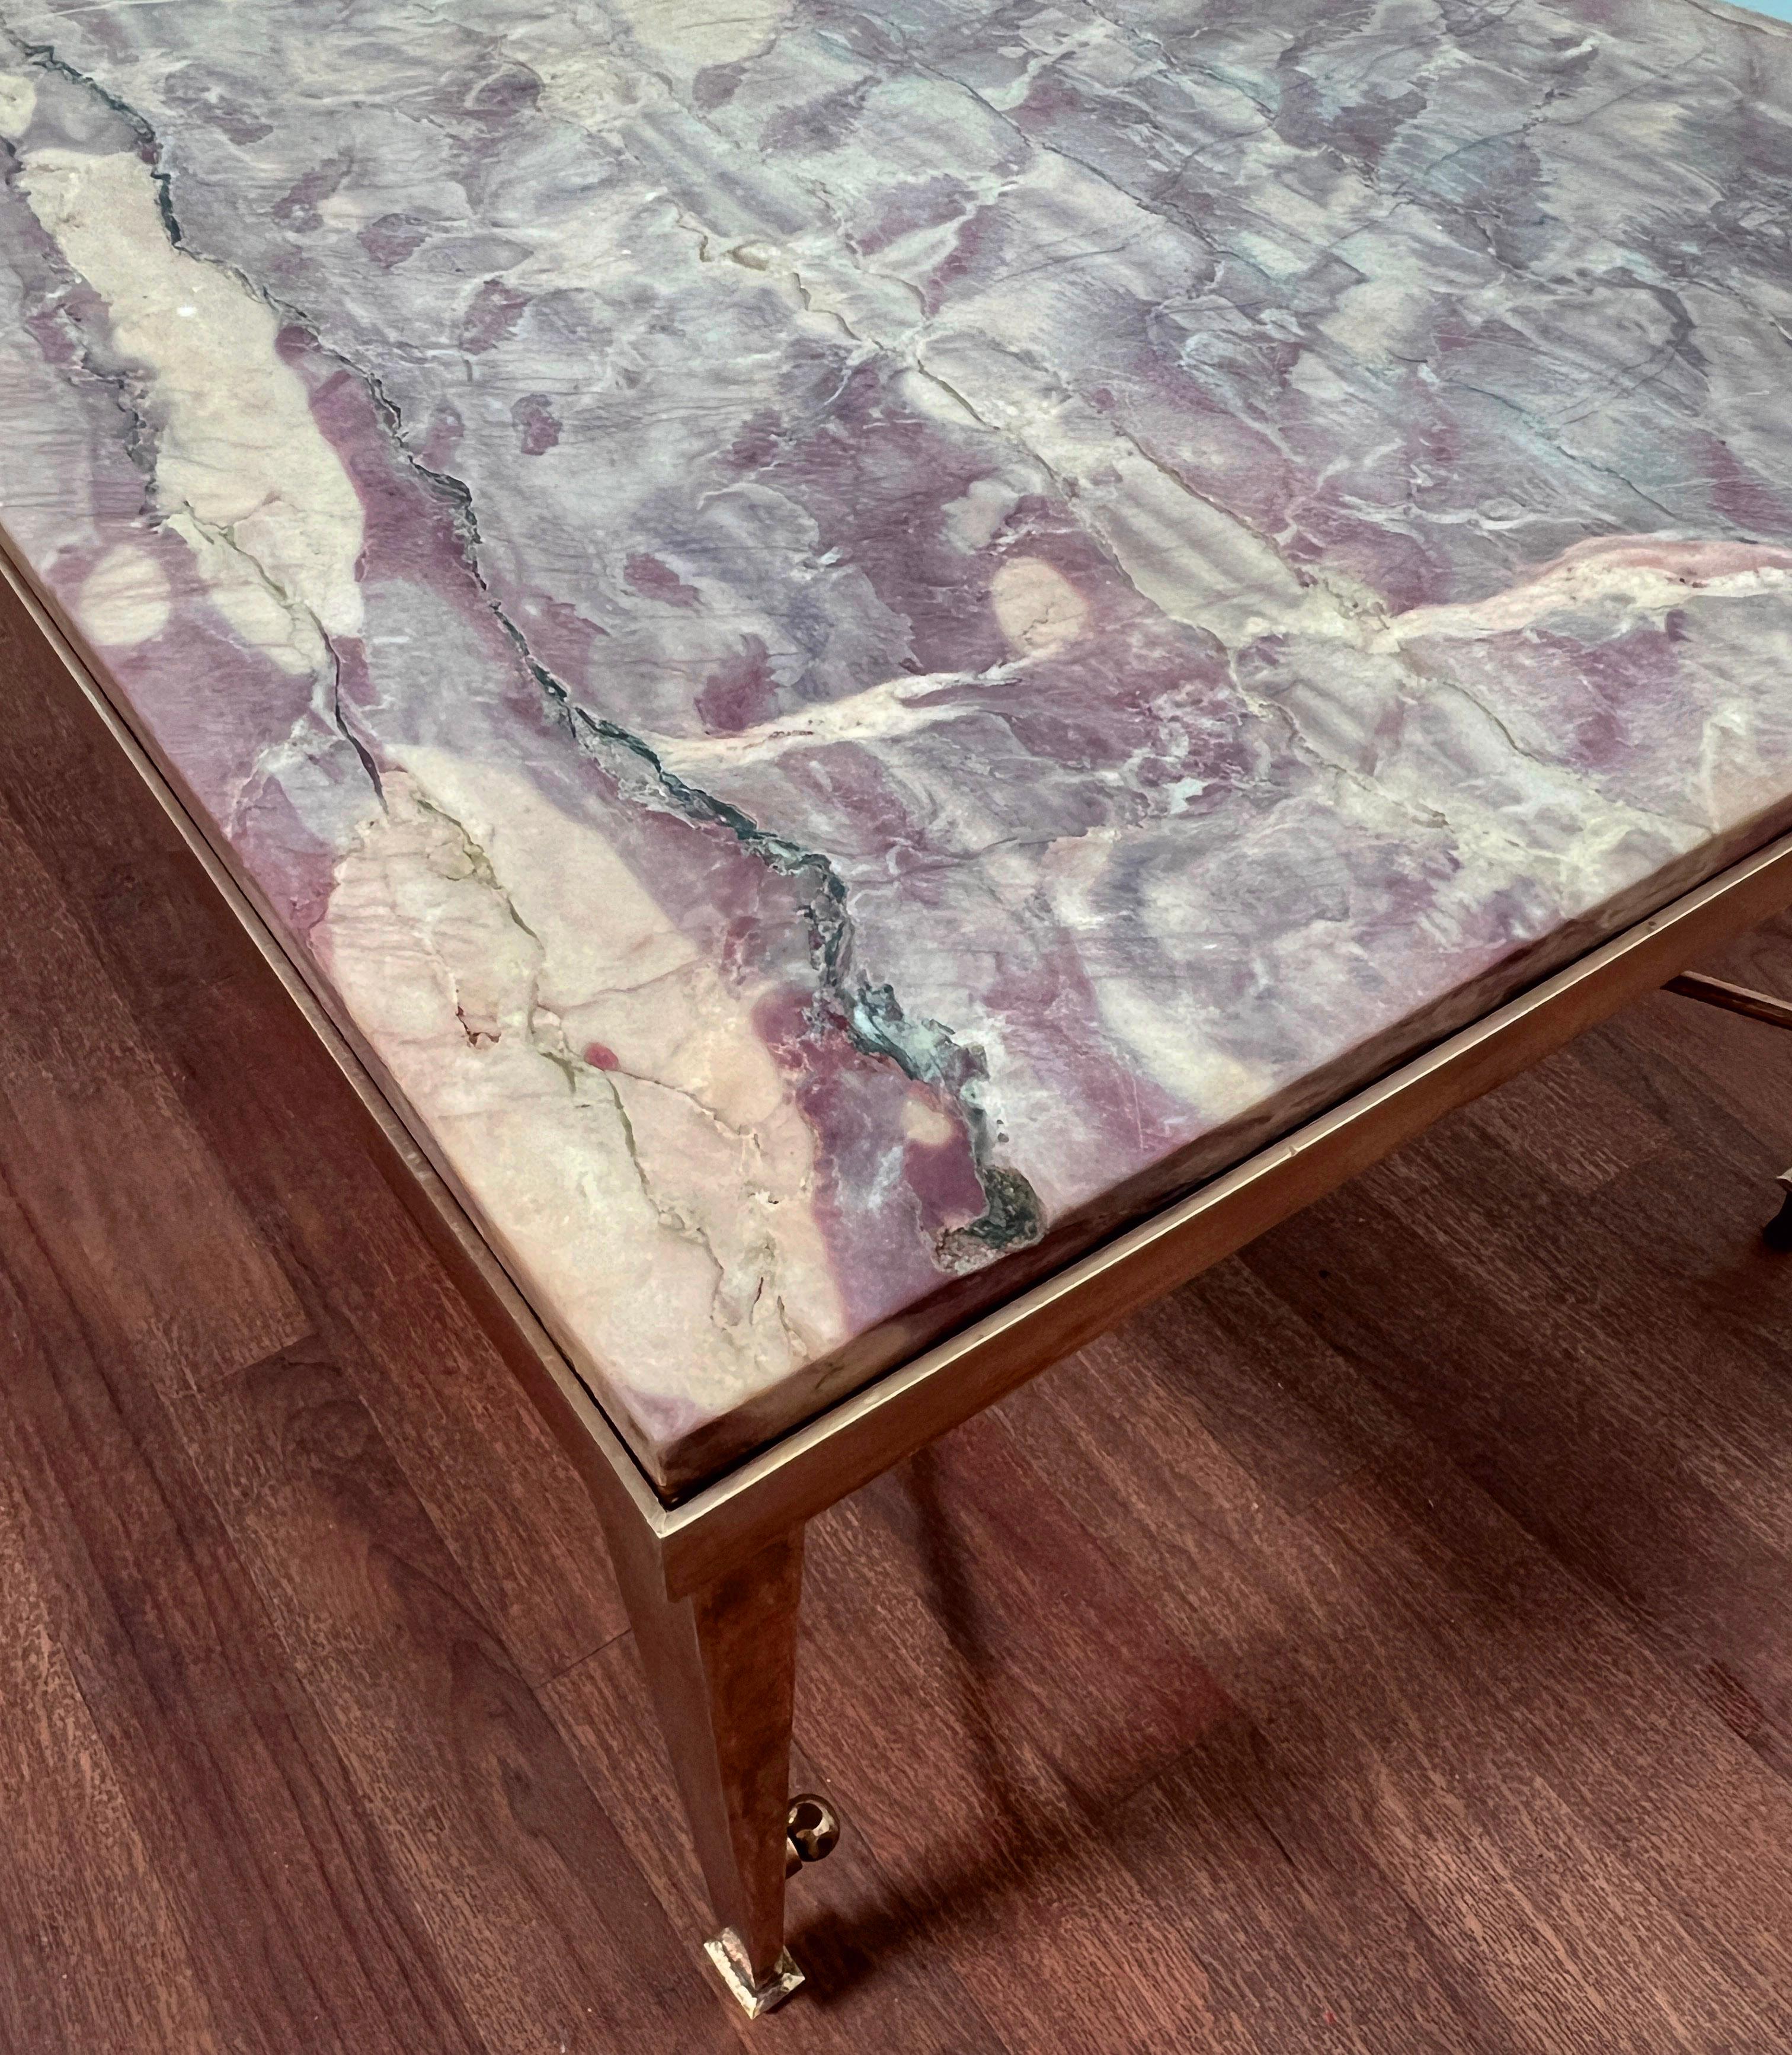 Maison Jansen Solid Brass Coffee Table With Lavender Marble Top, C. 1950s For Sale 5